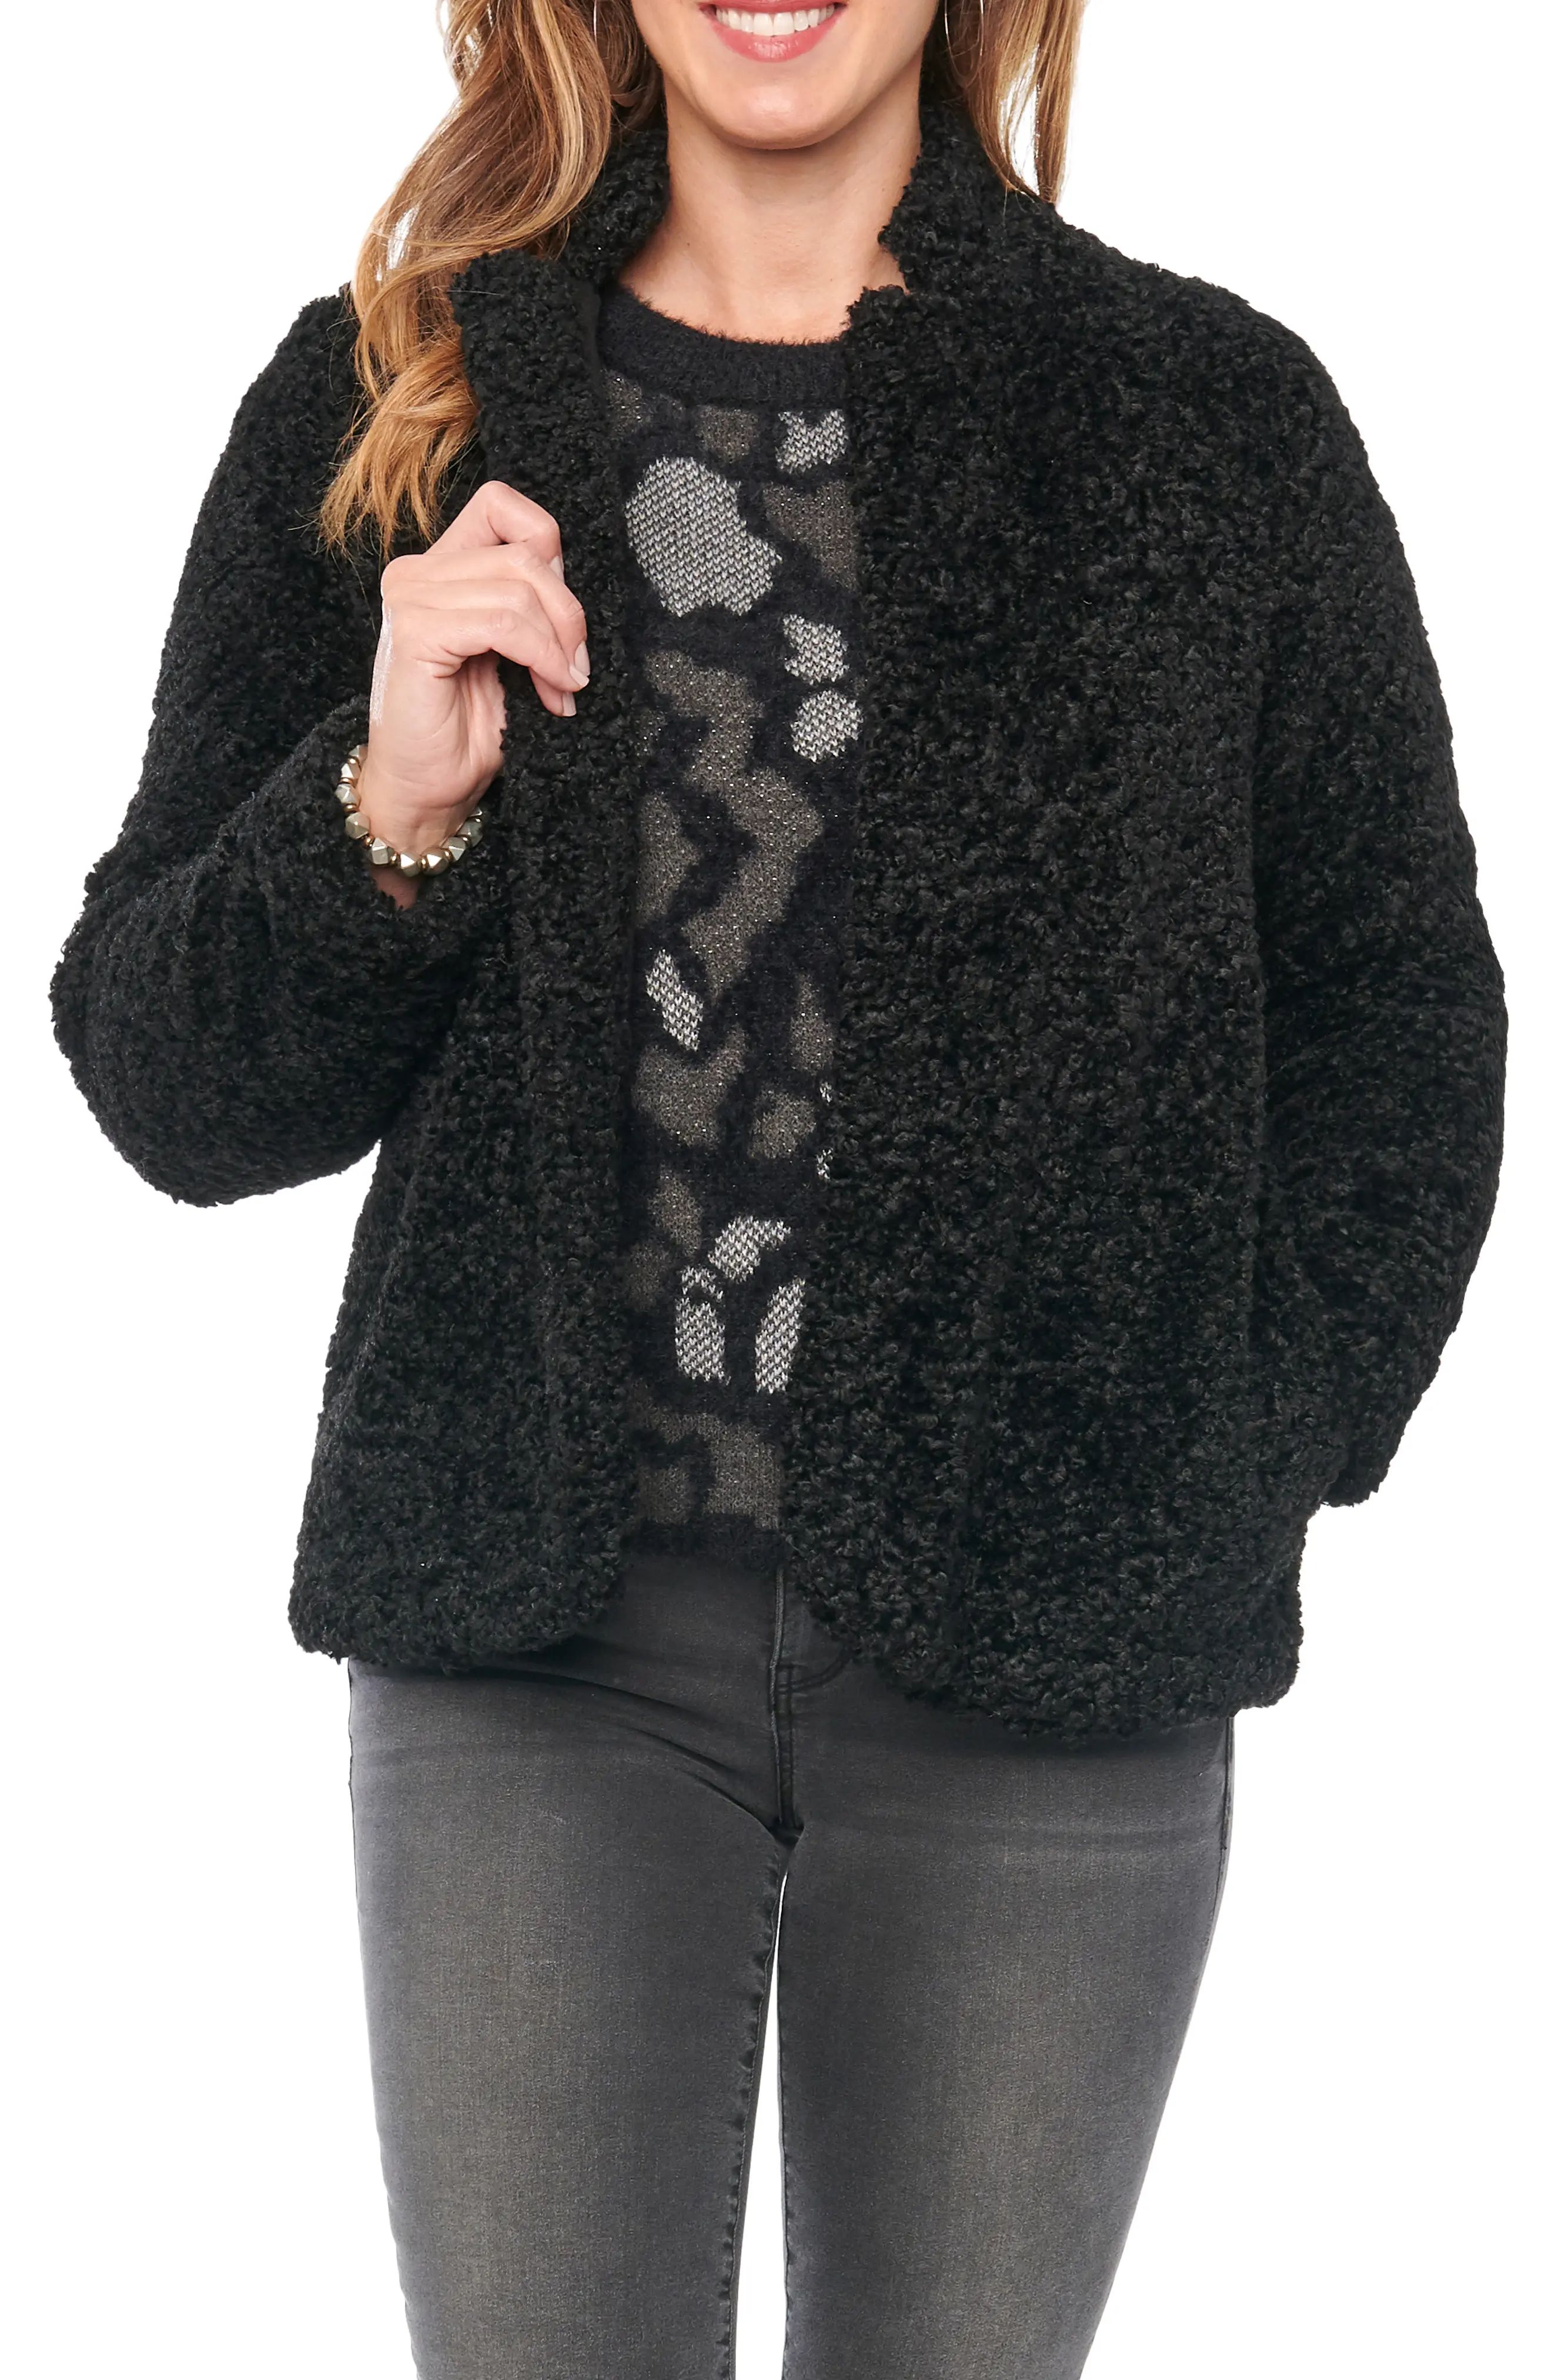 Wit & Wisdom Faux Fur Jacket, Size Small in Black at Nordstrom | Nordstrom